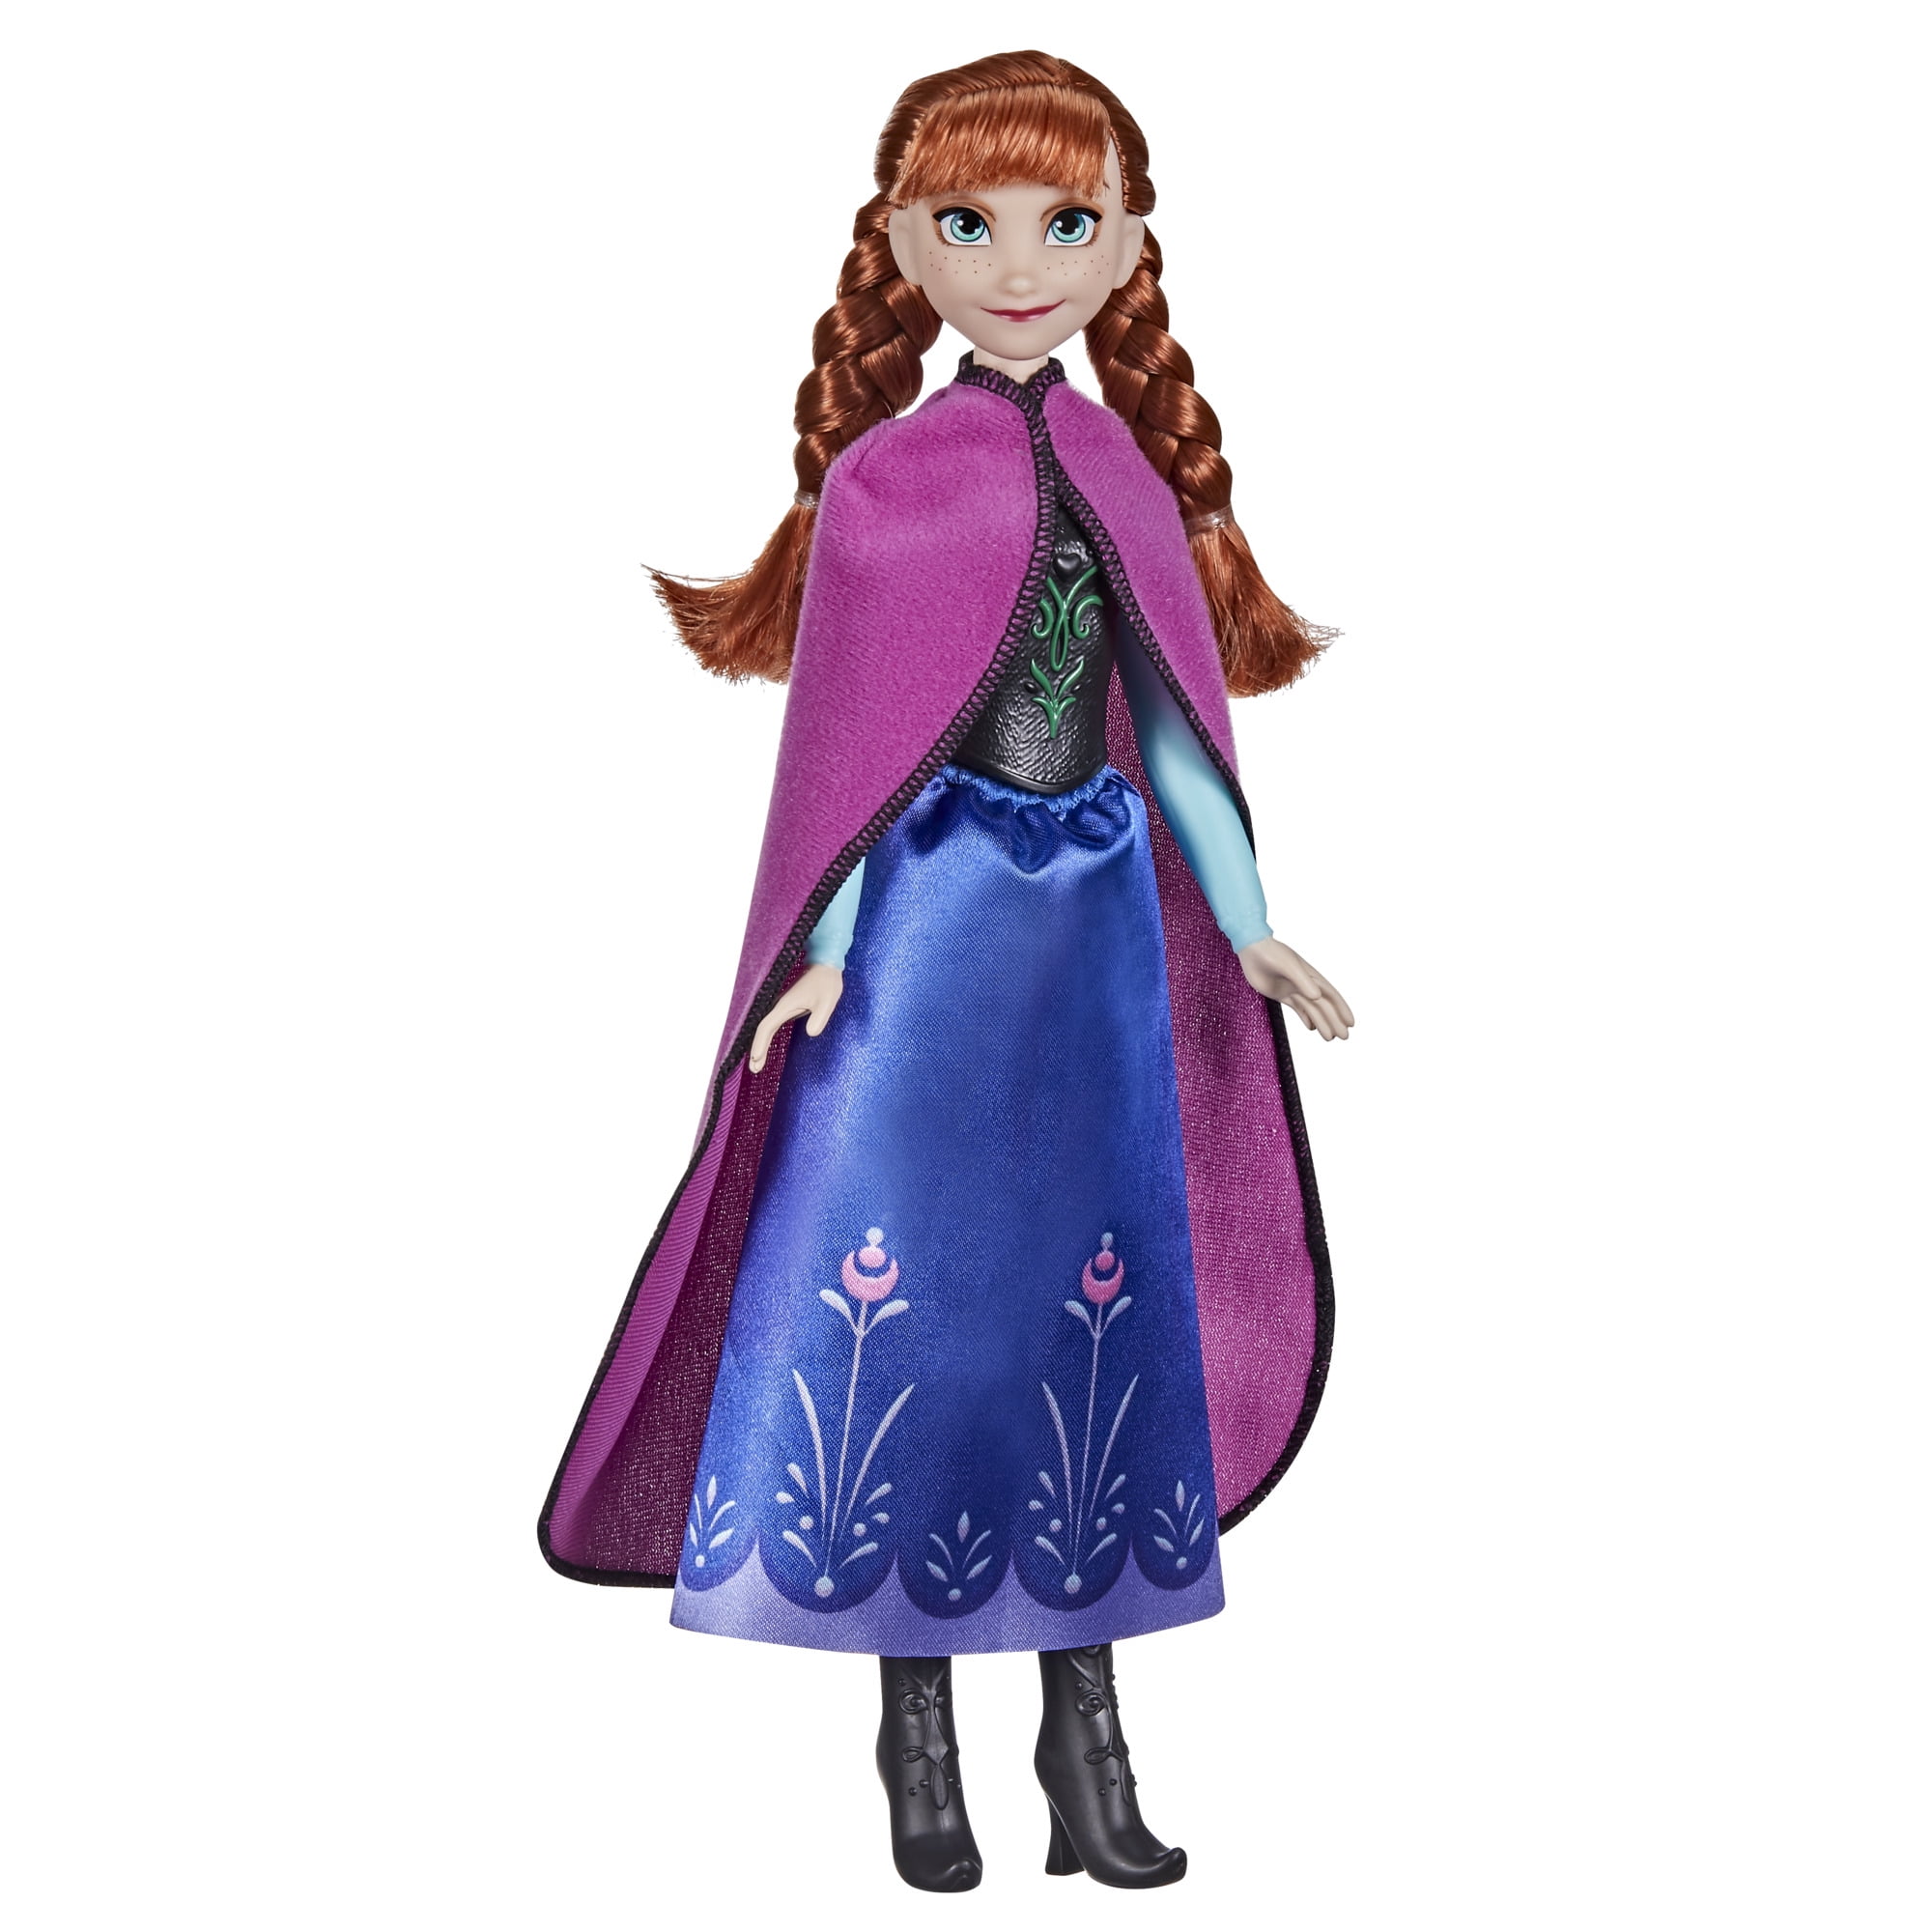 Disney'S Frozen Shimmer Anna Doll, Skirt, Shoes, And Long Red Hair - Walmart.com